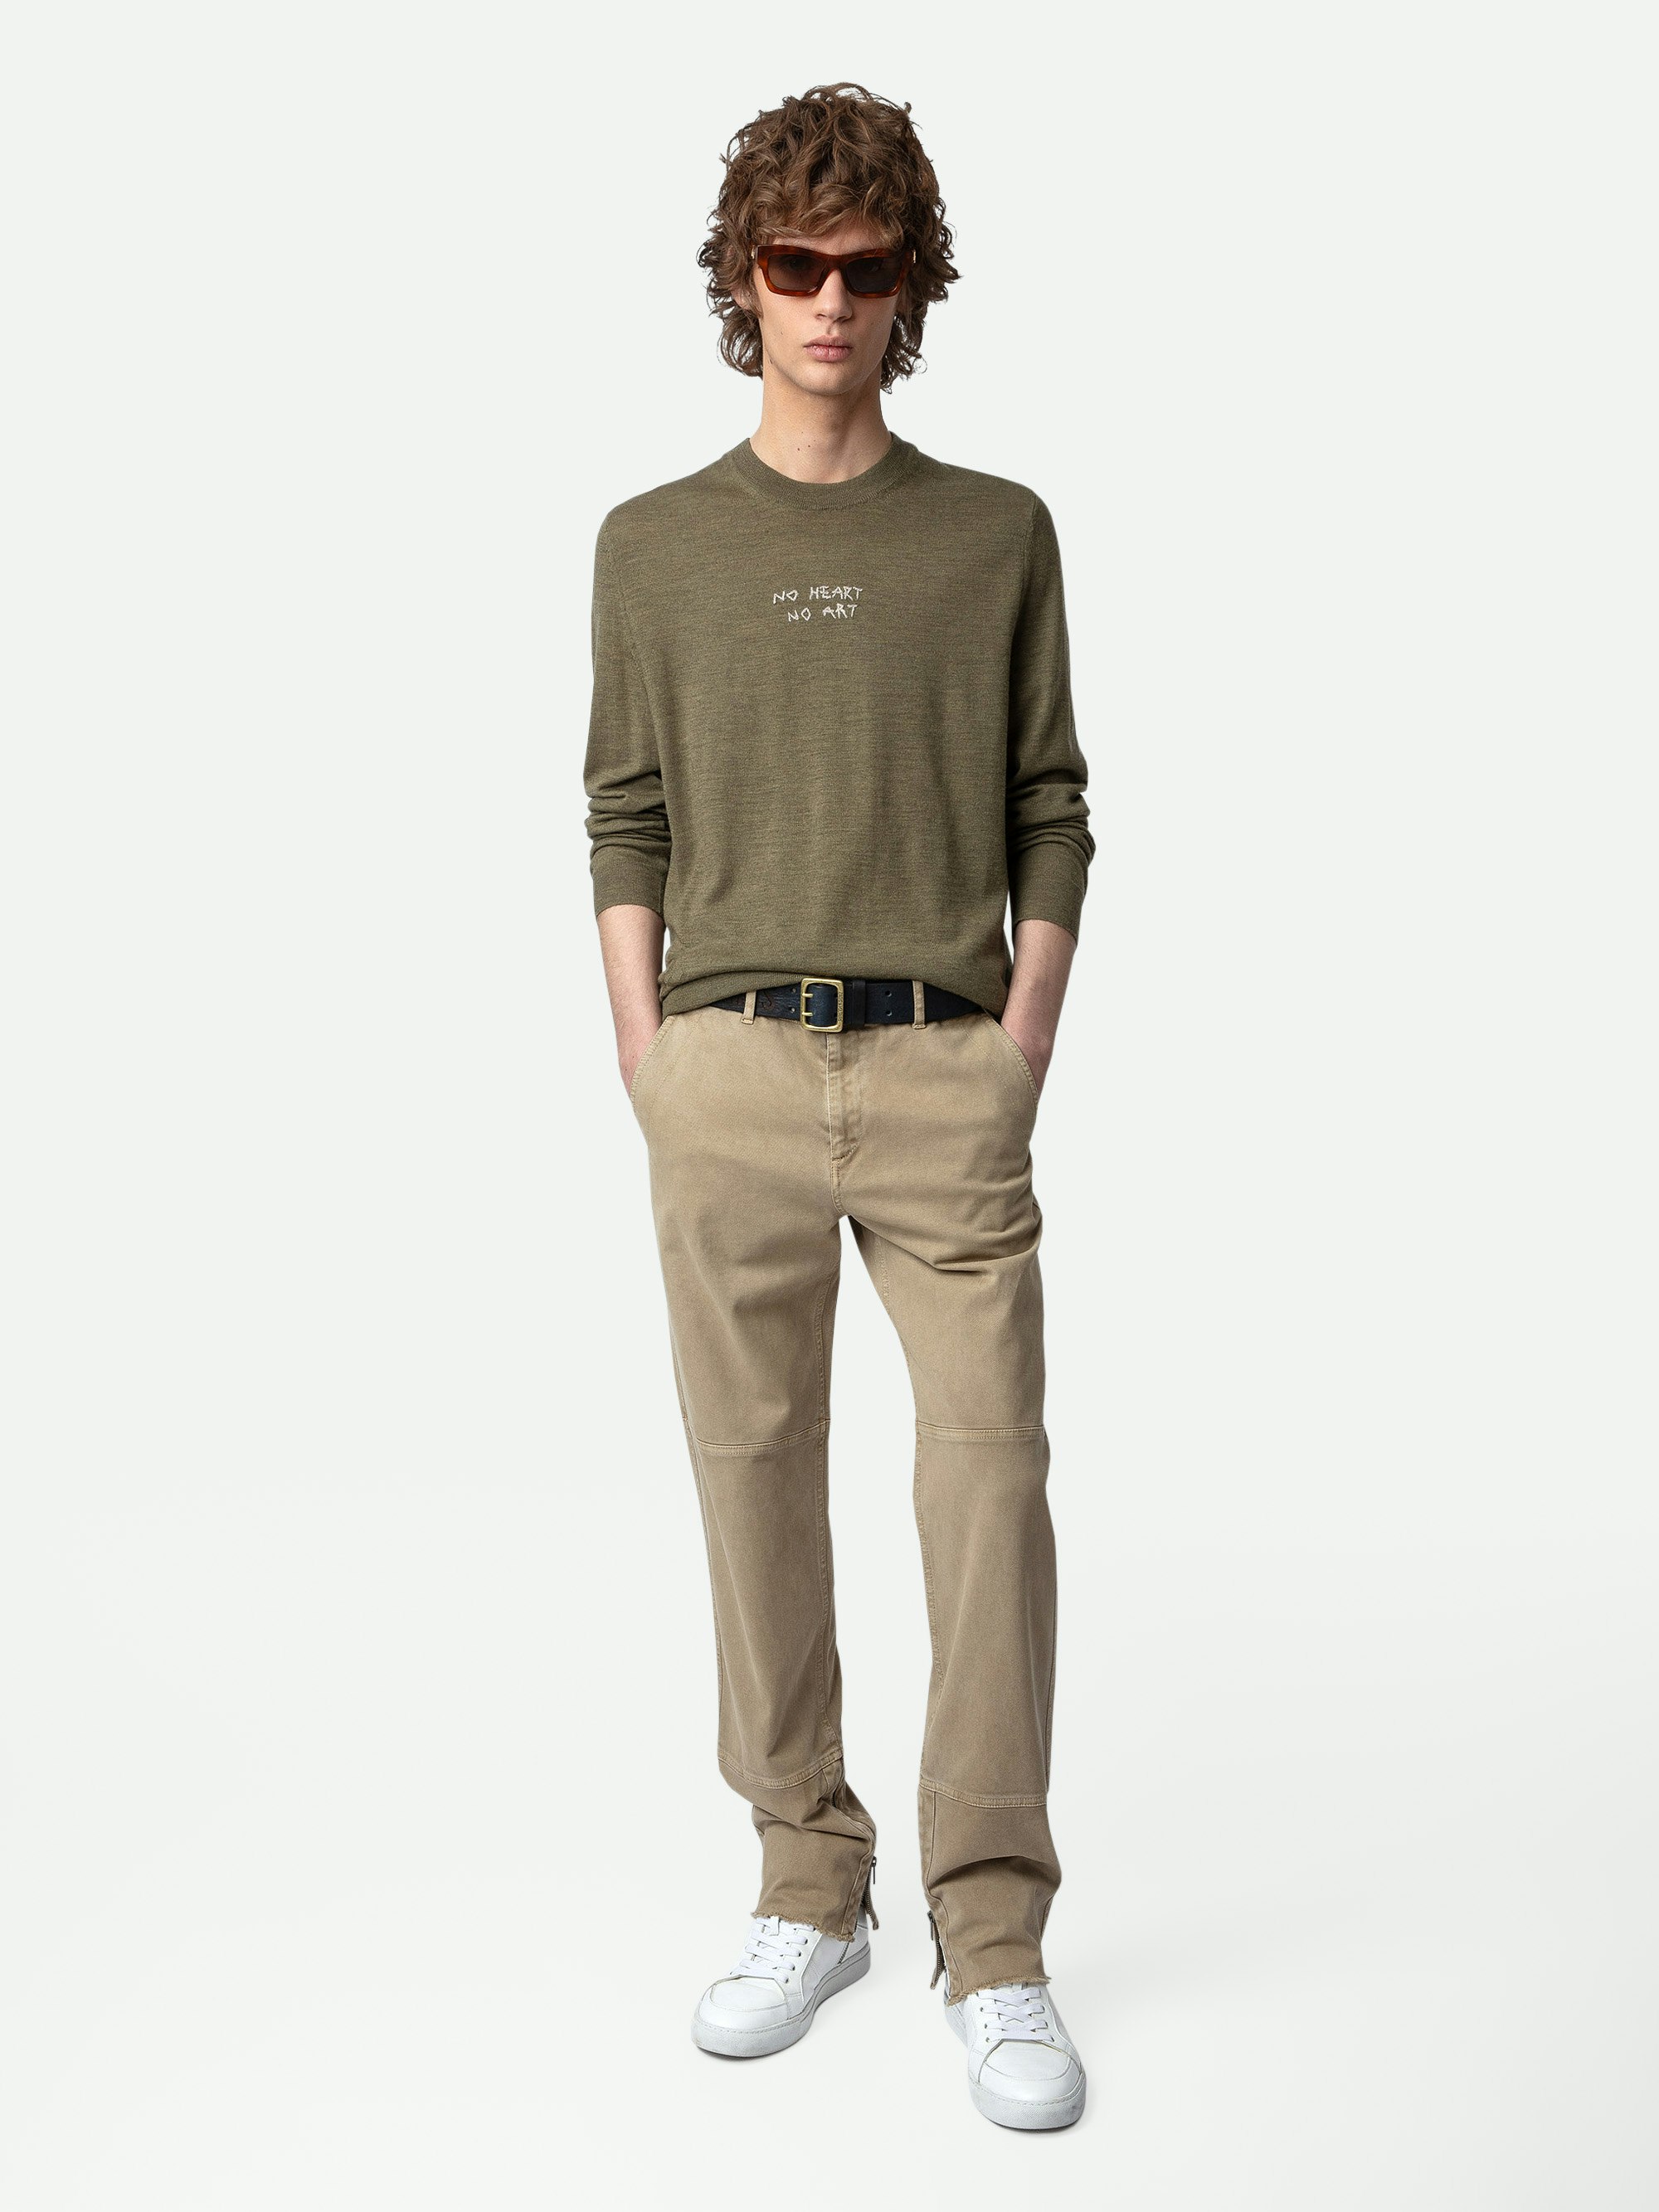 Pocky Trousers - Light beige cotton trousers with zip fly and raw edges.